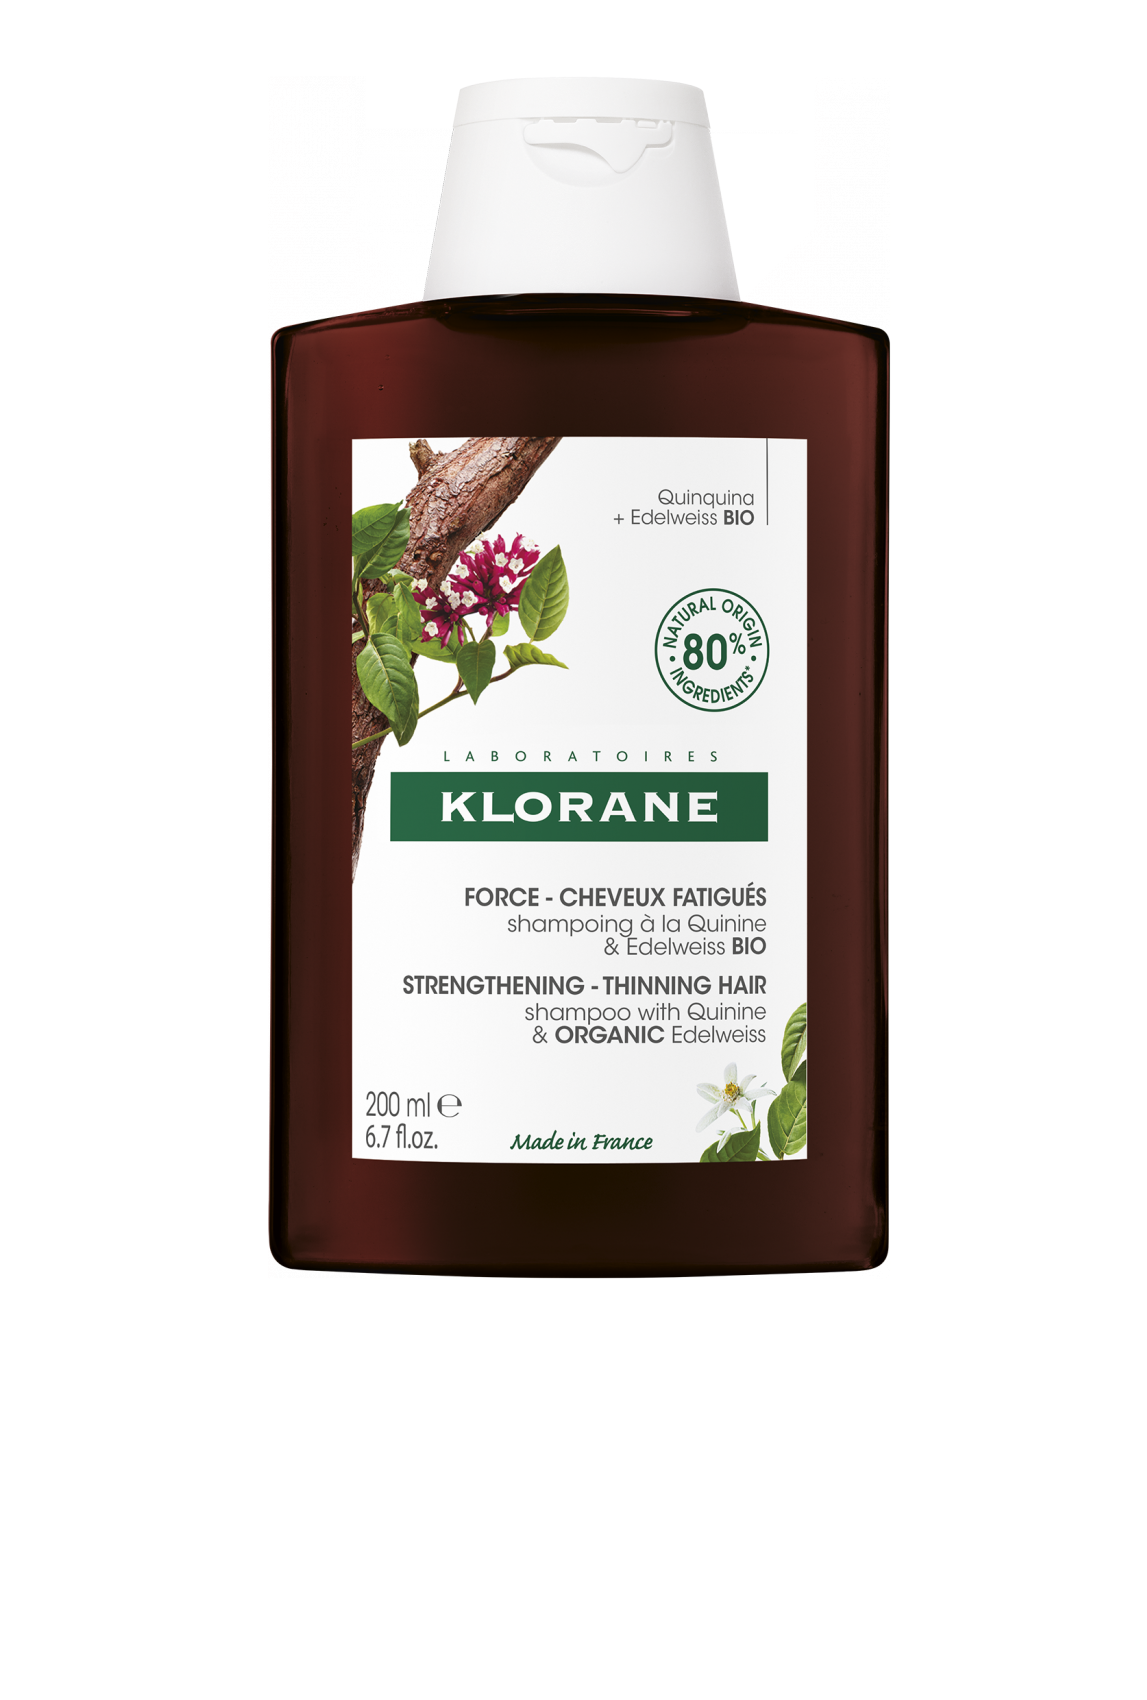 Klorane Strengthening Shampoo with Quinine and Organic Edelweiss for Thinning Hair